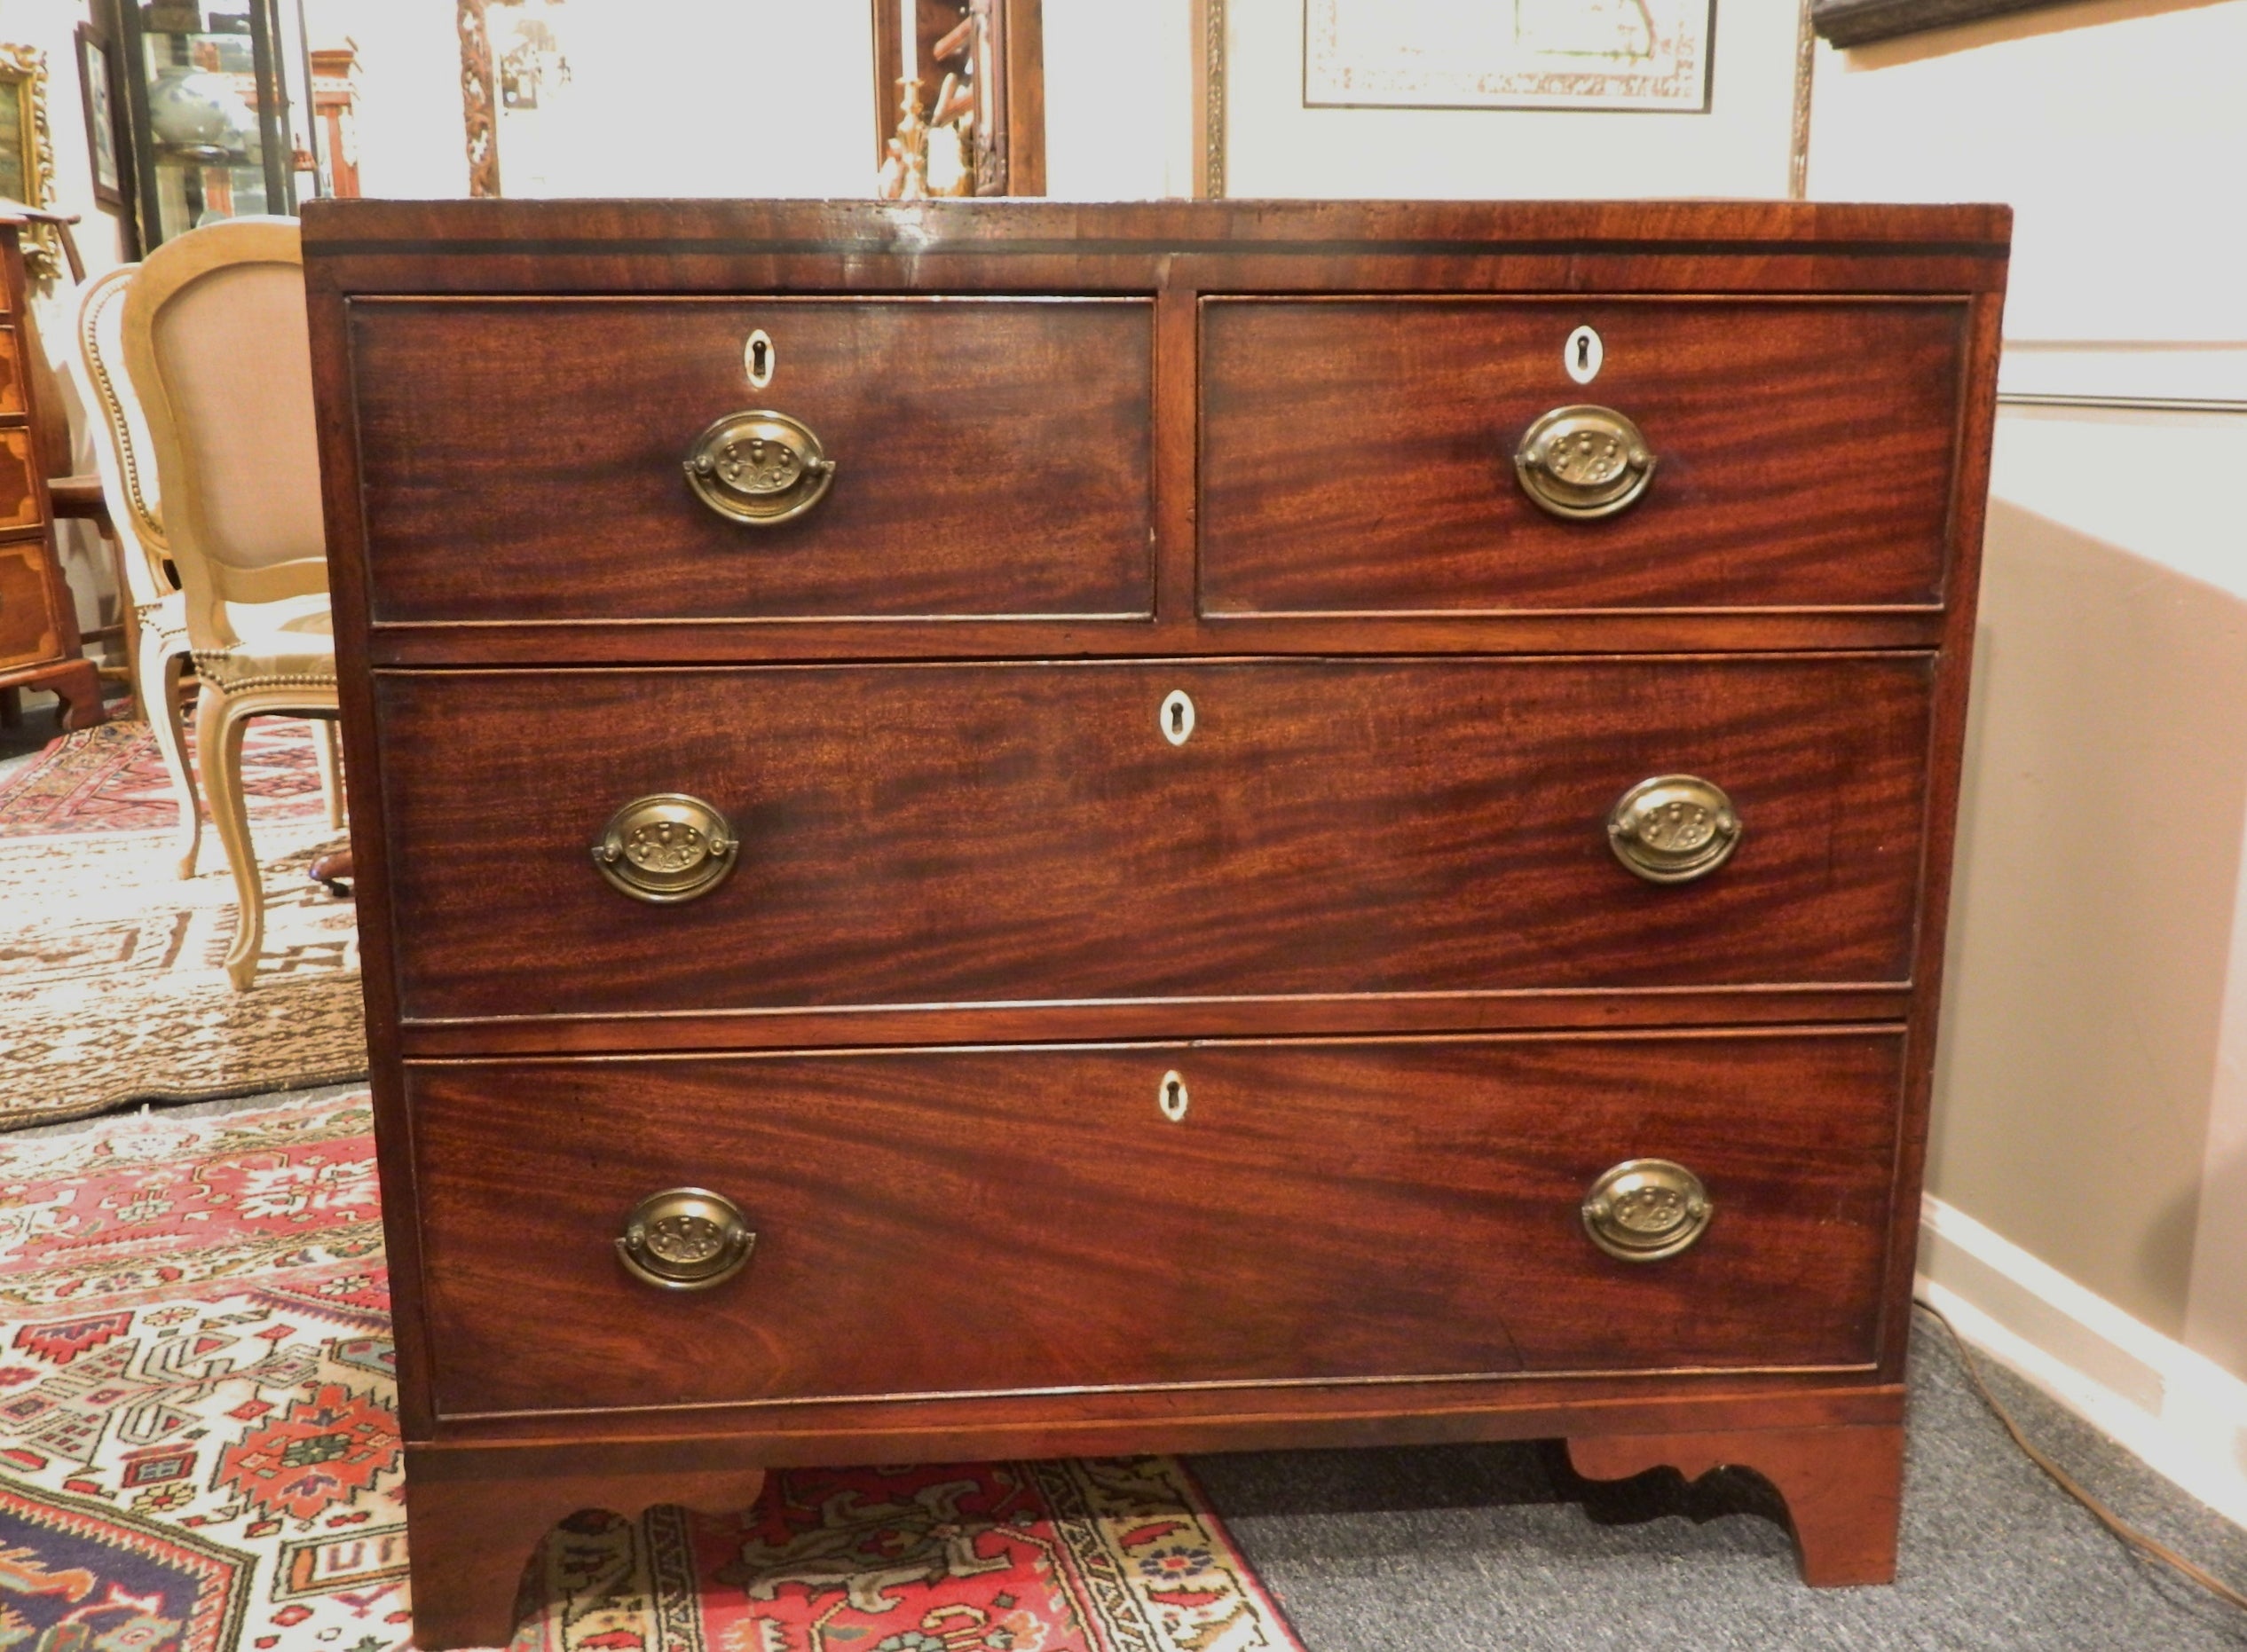 Regency Inlaid Small Mahogany Chest of Drawers